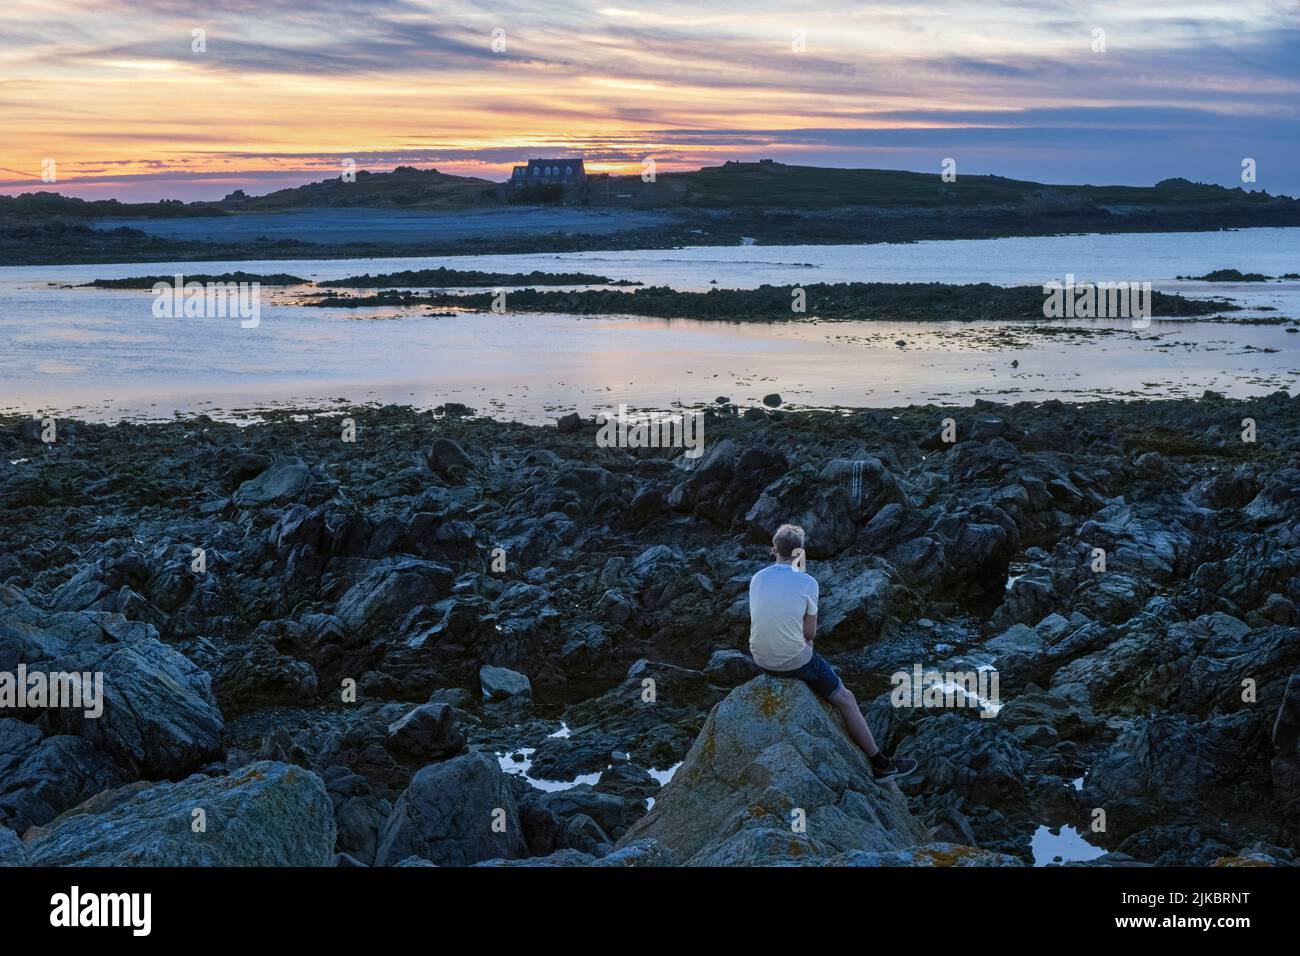 A man watching the sun setting over Lihou Island from L'Erée, Guernsey, Channel Islands Stock Photo